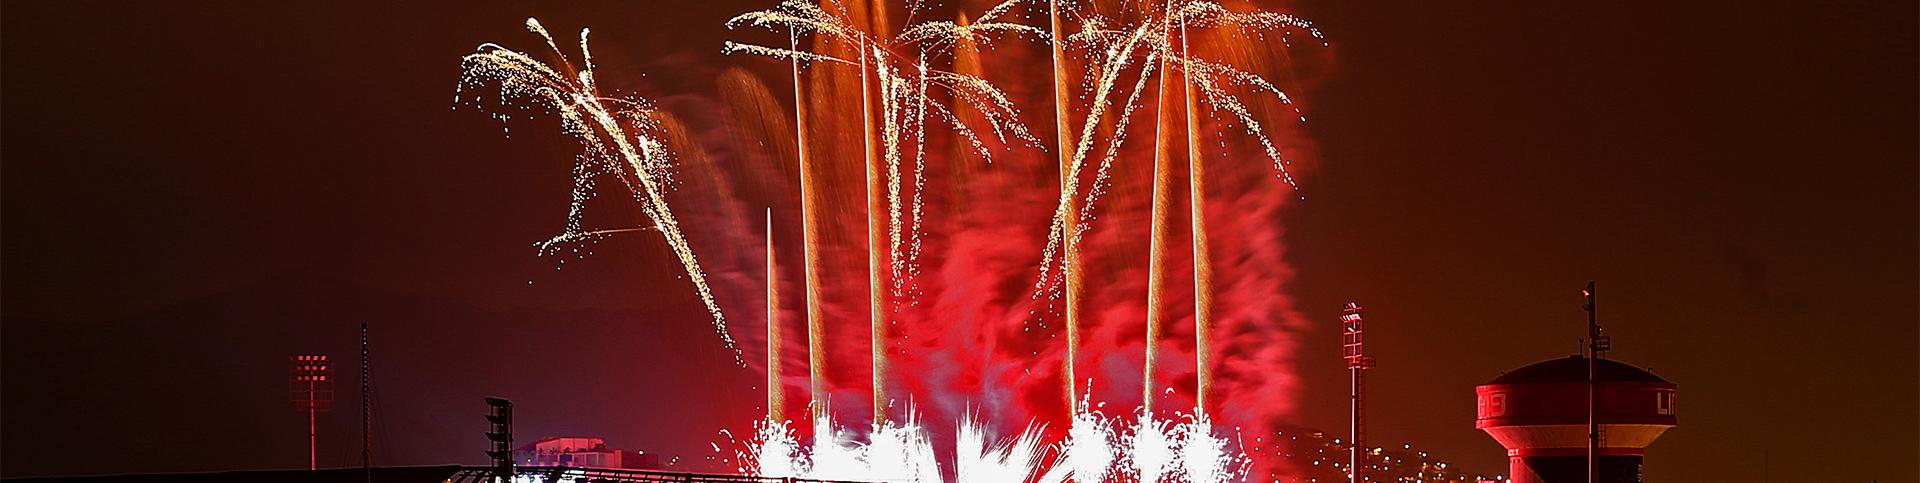 Fireworks on the Parapan American Games Closing Ceremony